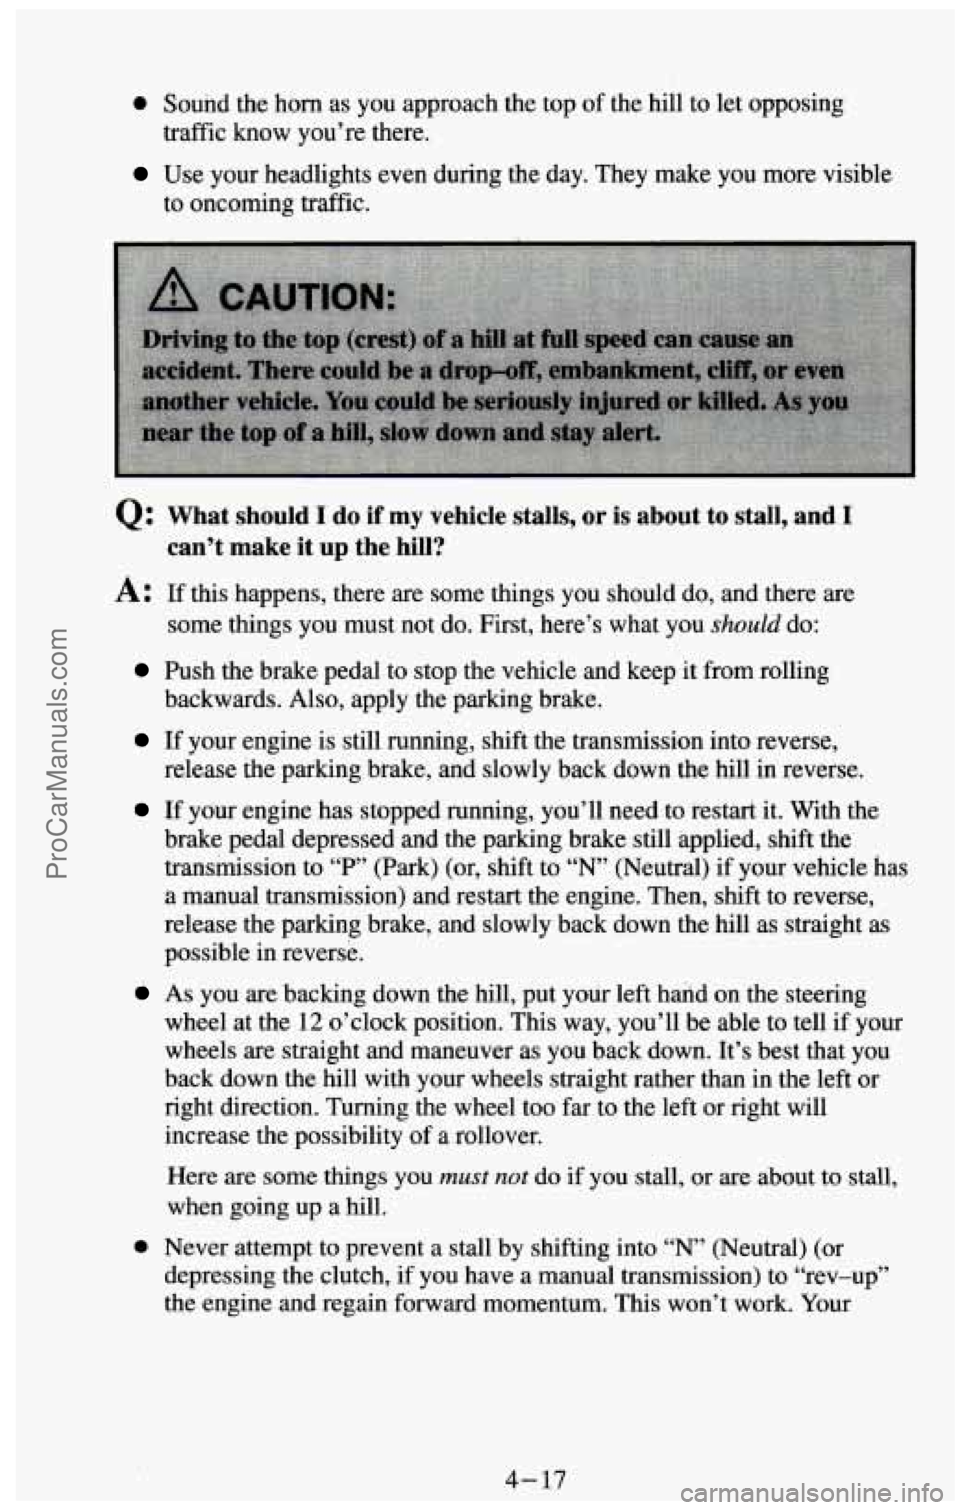 CHEVROLET SUBURBAN 1994  Owners Manual 0 Sound  the horn as you  approach  the top  of the  hill to  let opposing 
Use your  headlights  even  during  the  day. They make you more  visible 
traffic know you’re there. 
to 
oncoming  traff